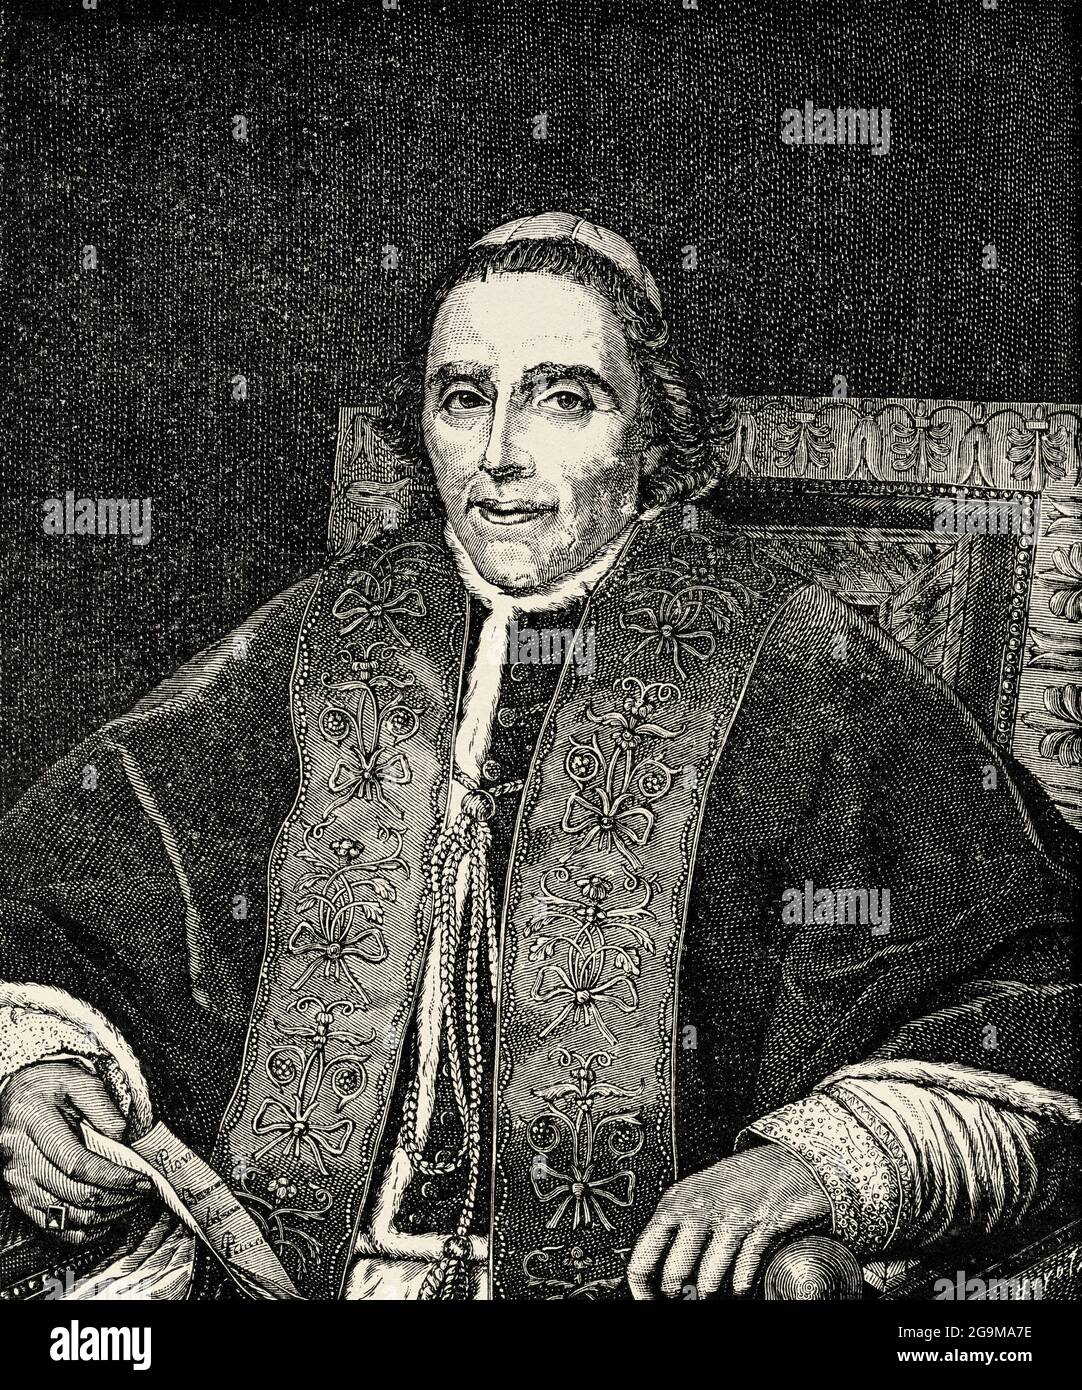 Portrait of Pope Pius VII (1742-1823) Barnaba Niccolò Maria Luigi Chiaramonti. Holding the Concordat of 25 January. 1813, Italy, Europe. Old 19th century engraved illustration from Jesus Christ by Veuillot 1881 Stock Photo